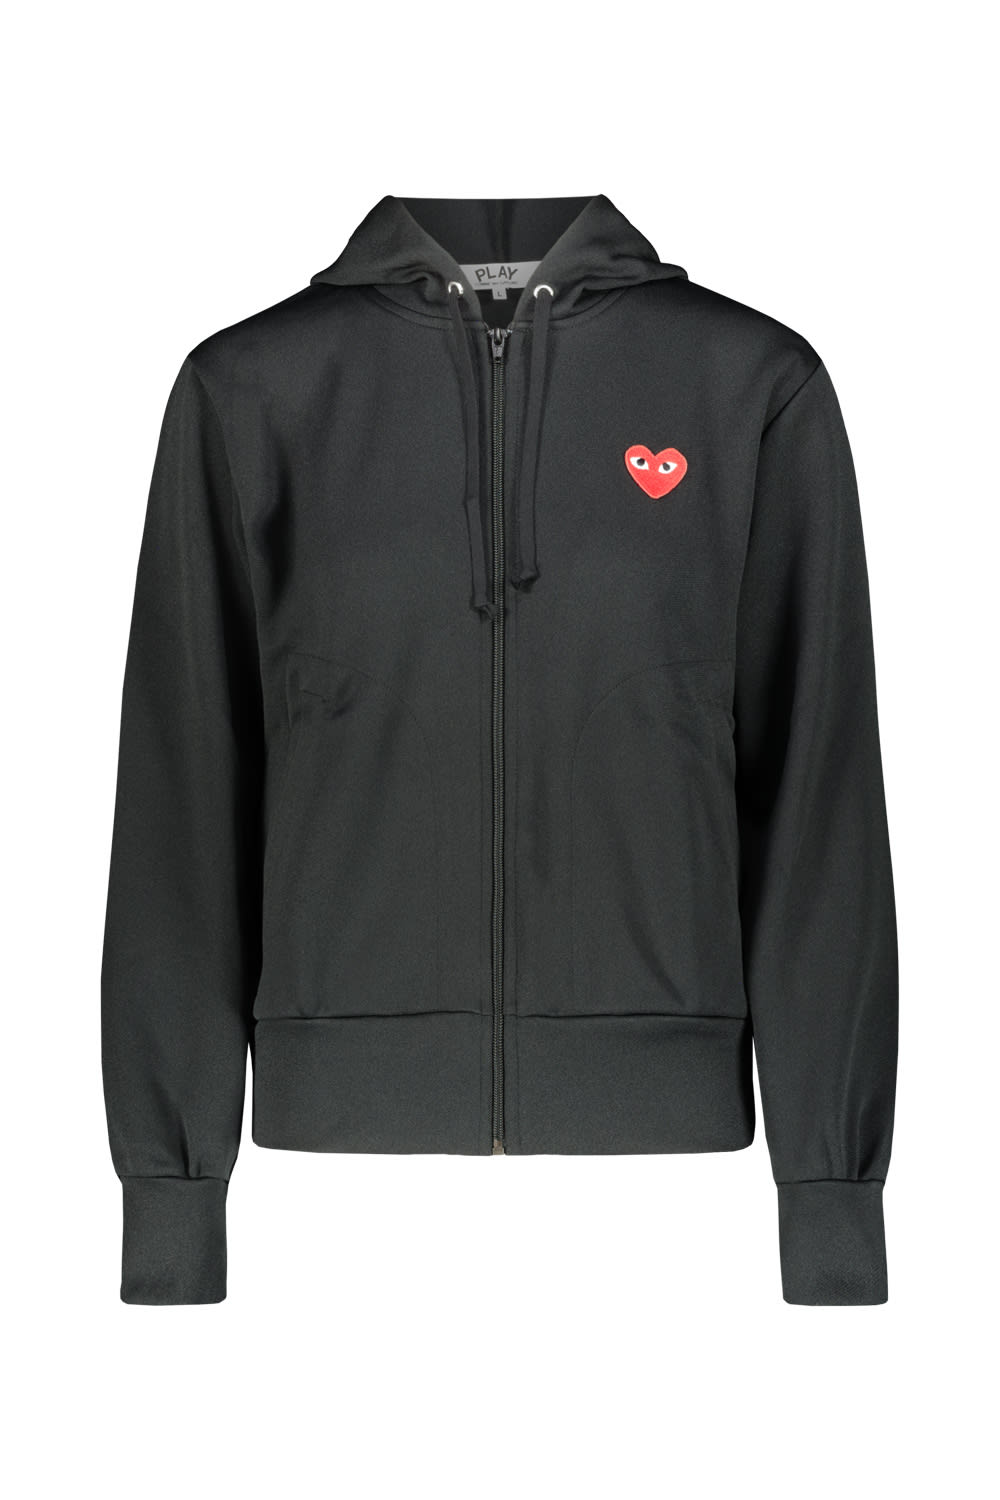 Comme Des Garçons Play Black Zipped Hoodie With Red Heart In Blk